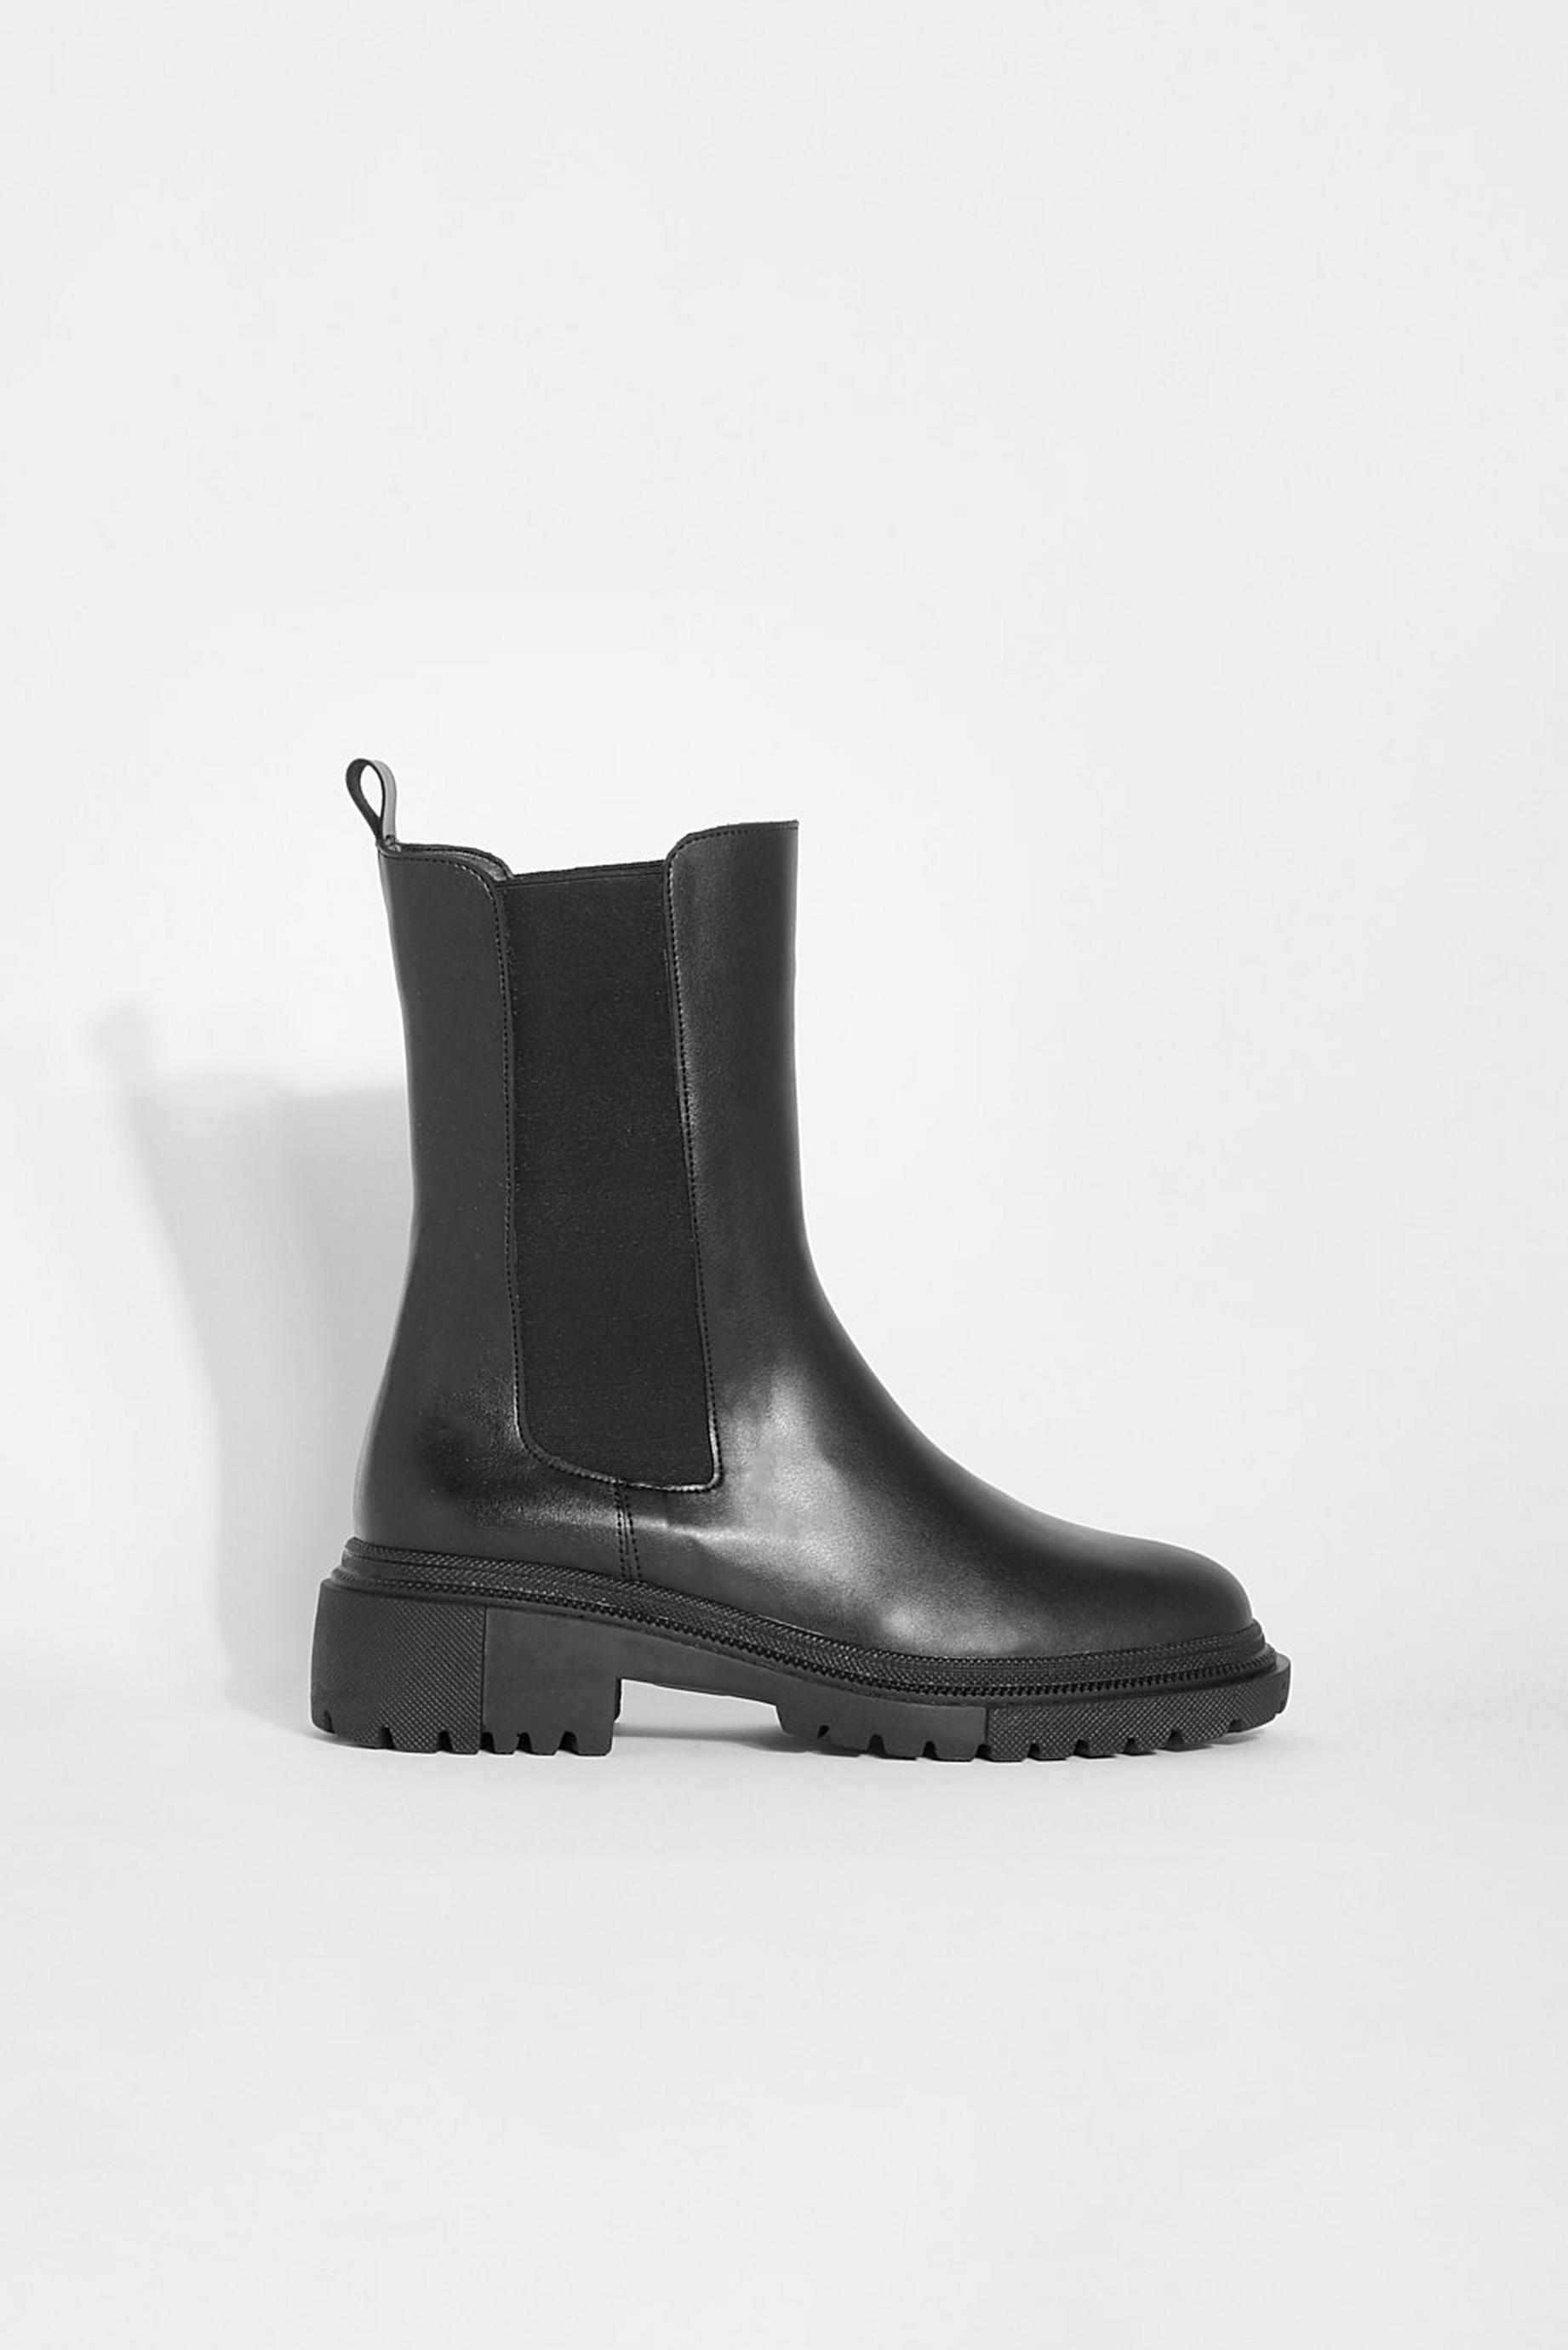 Split Sole High Ankle Chelsea Boots